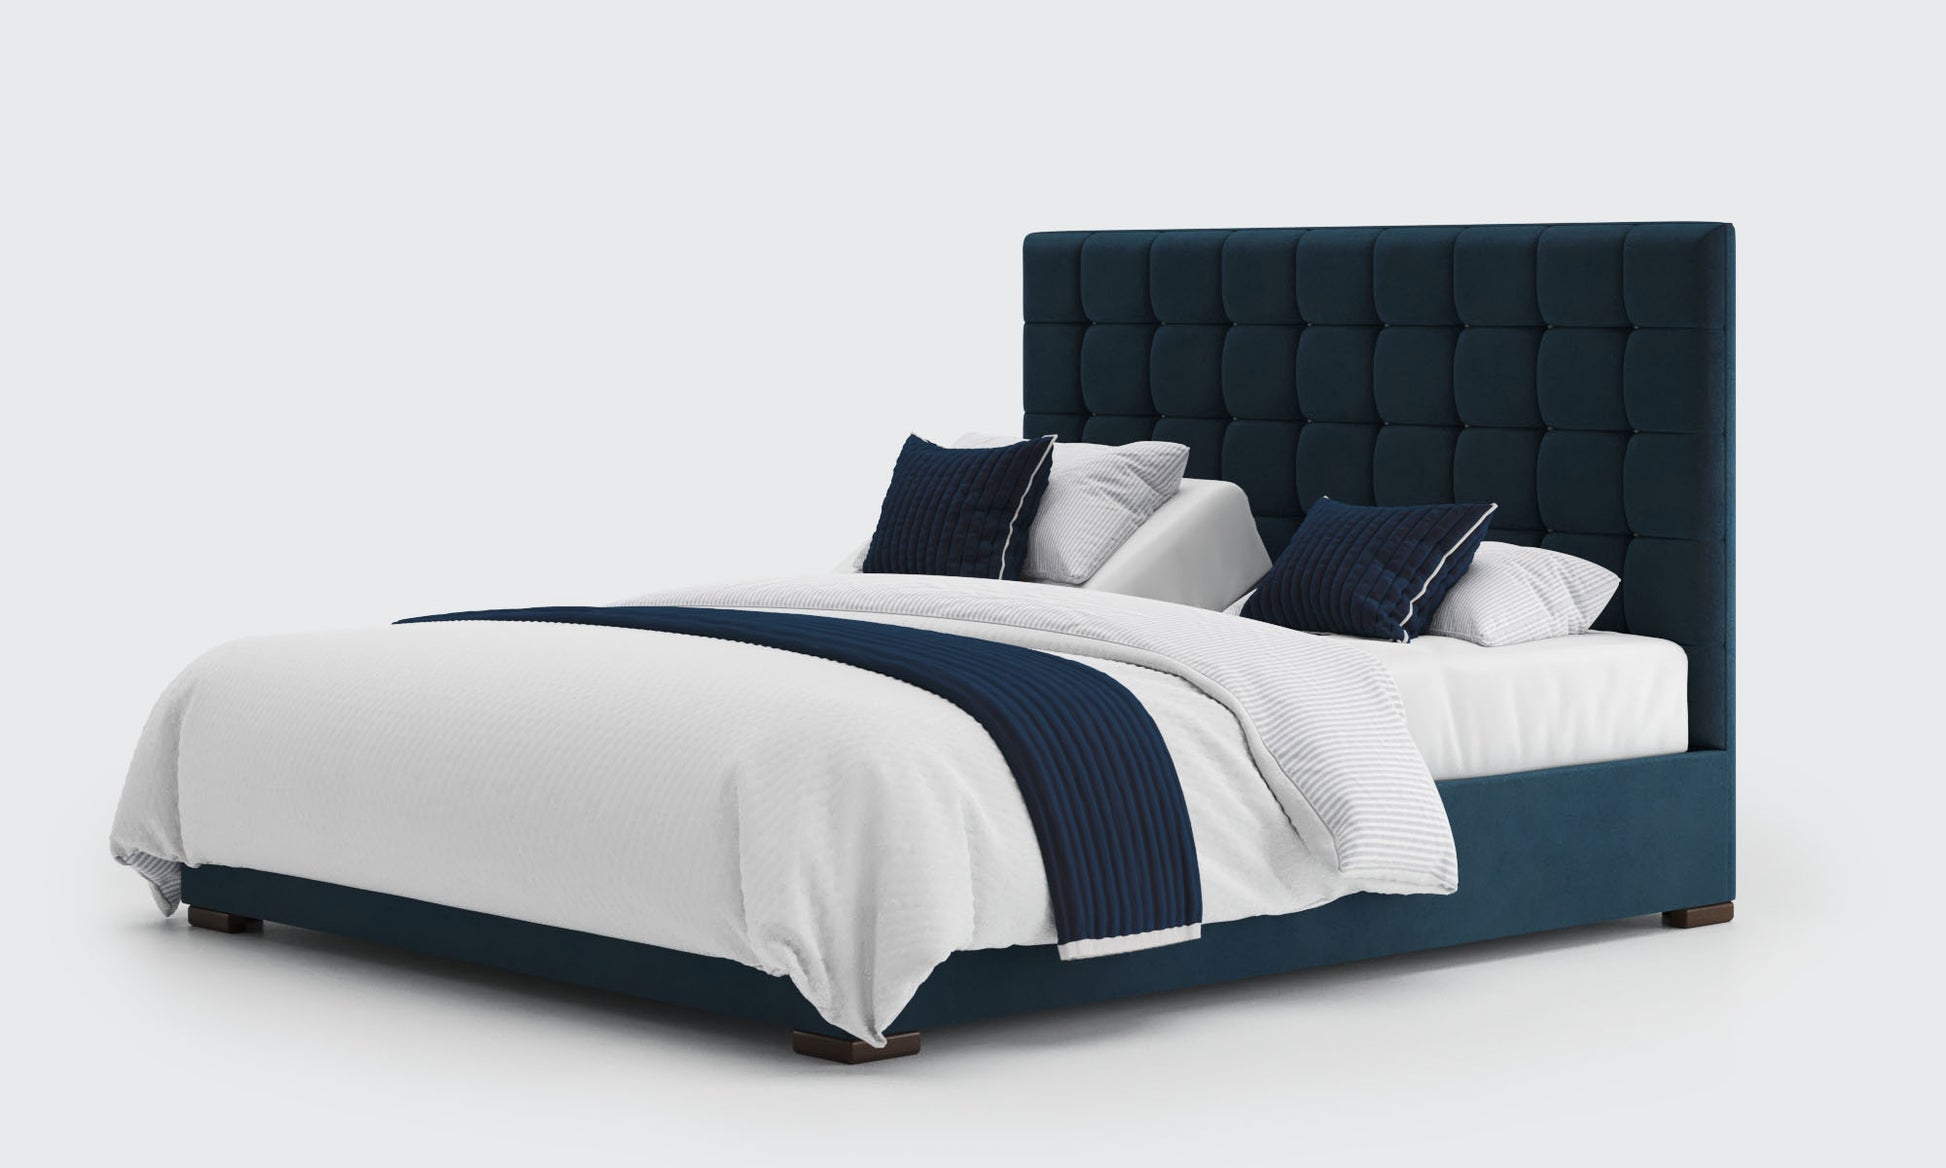 stratton 6ft super king dual bed and mattresses in the royal velvet material